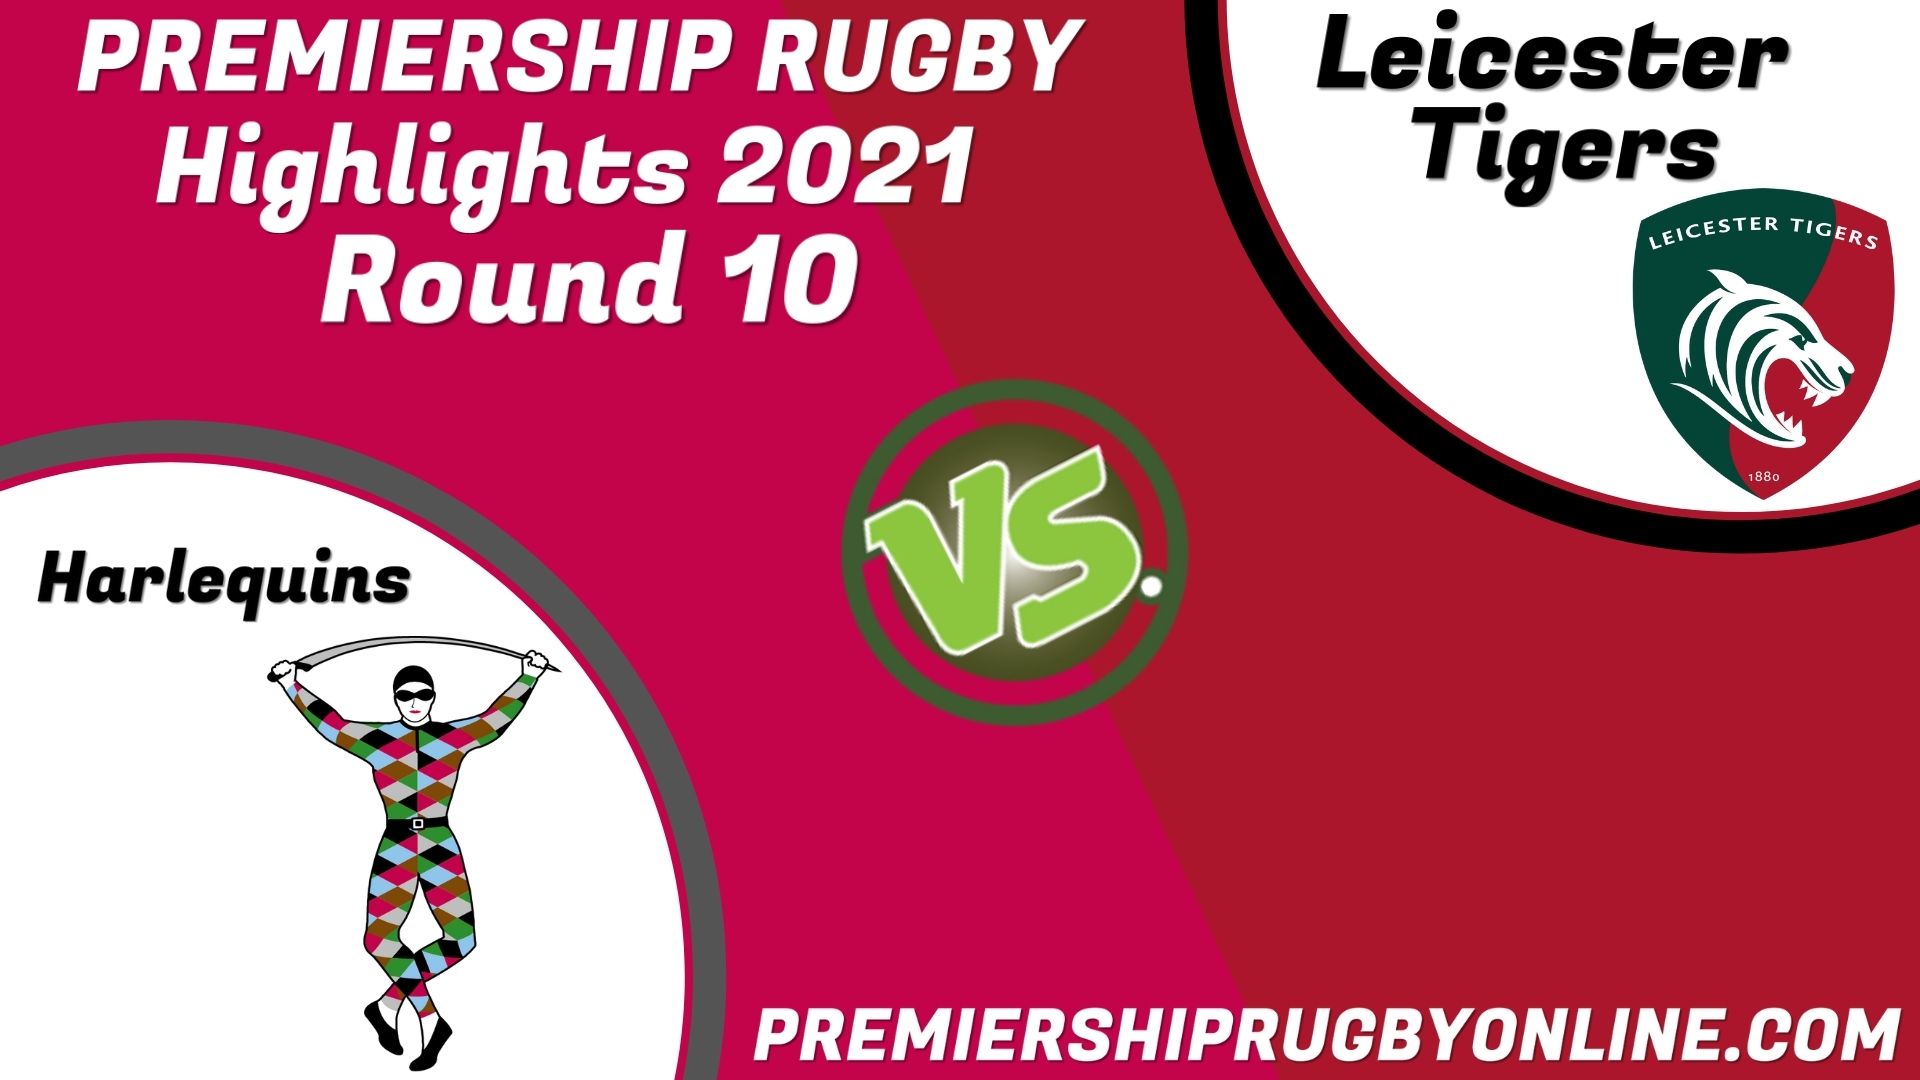 Leicester Tigers Vs Harlequins Highlights 2021 RD 10